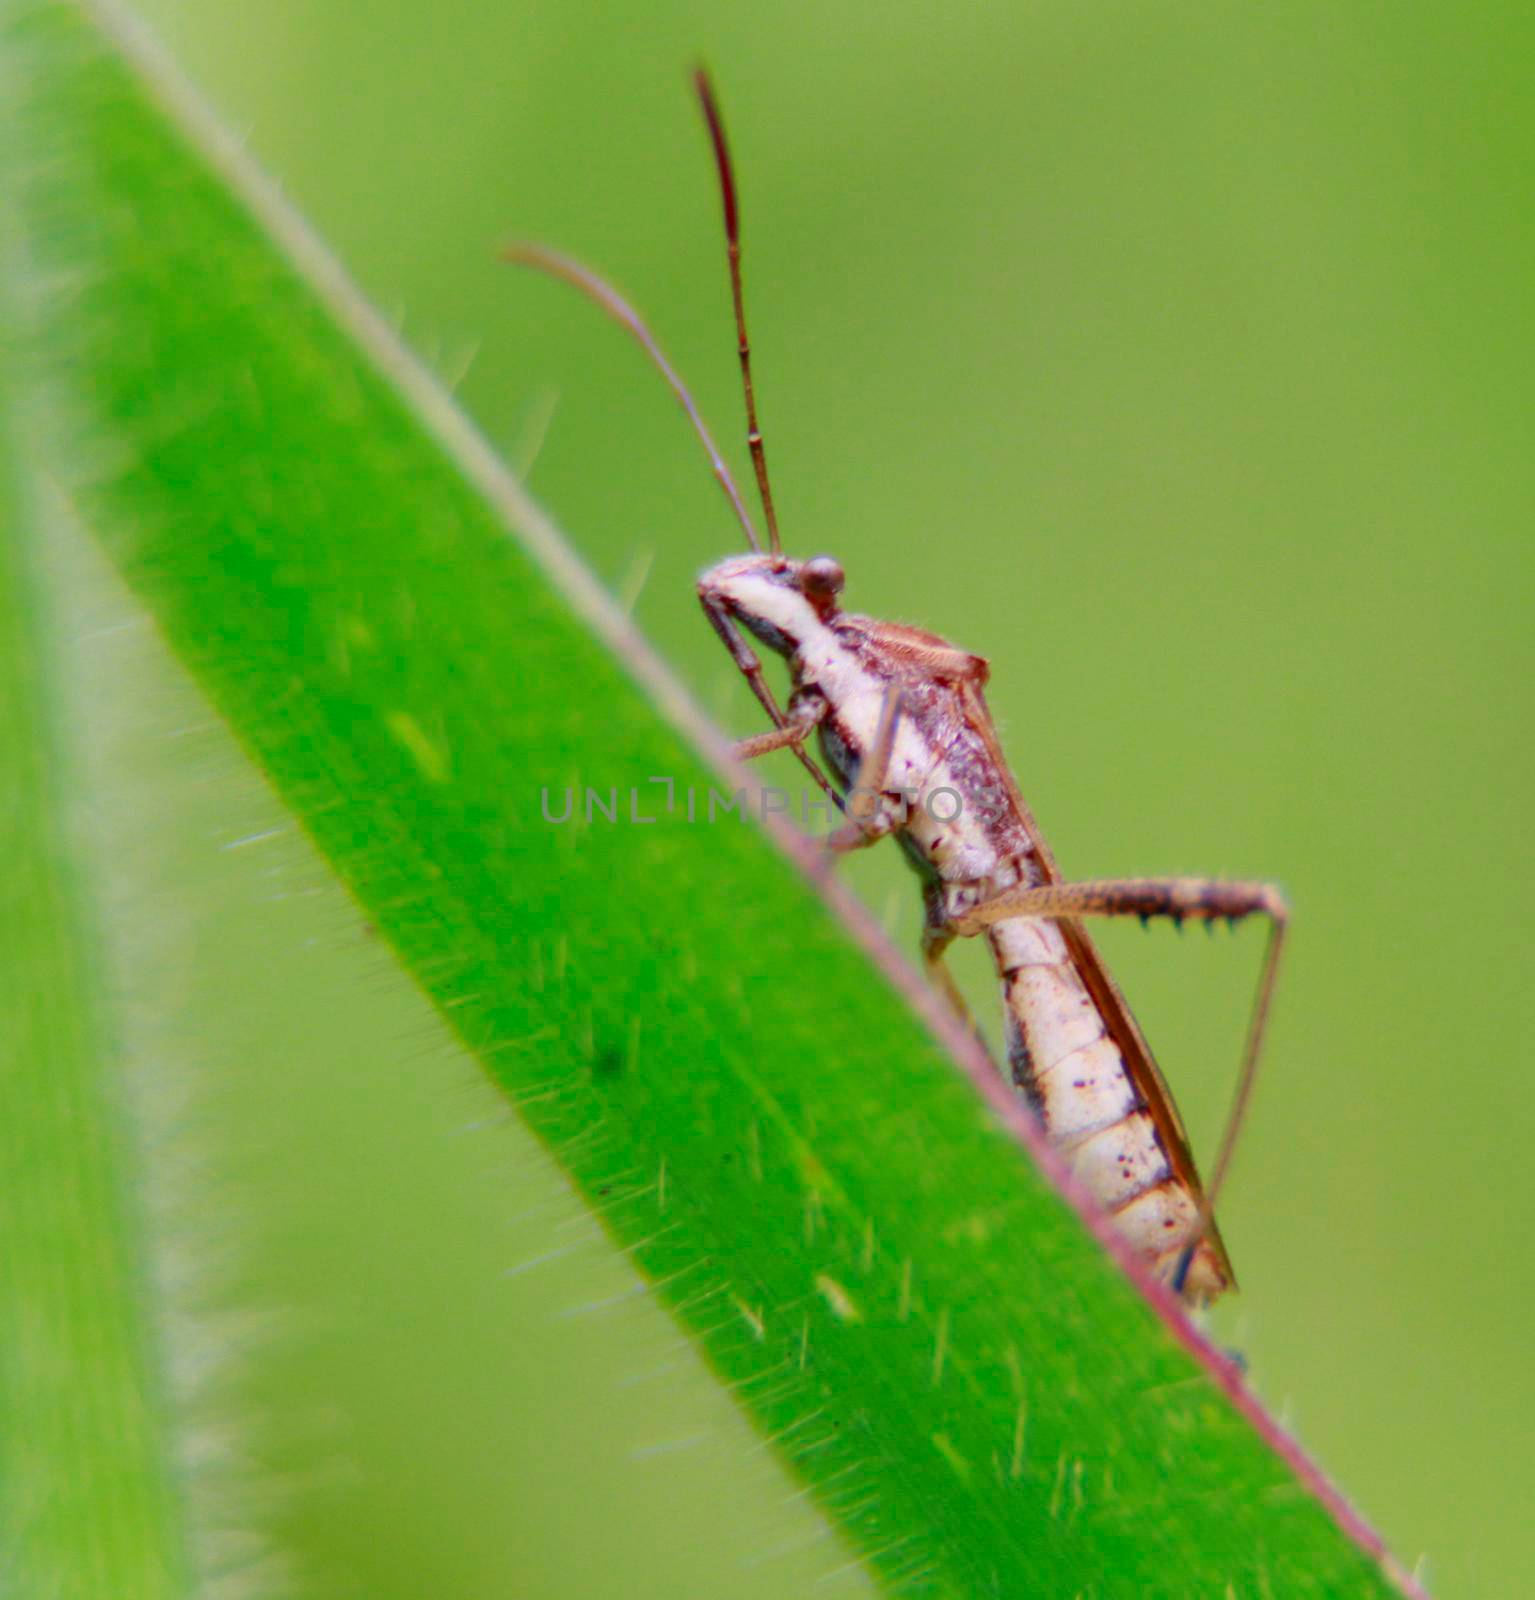 salvador, bahia / brazil - november 22, 2013: cricket insect is seen in crops in the city of Salvador.

